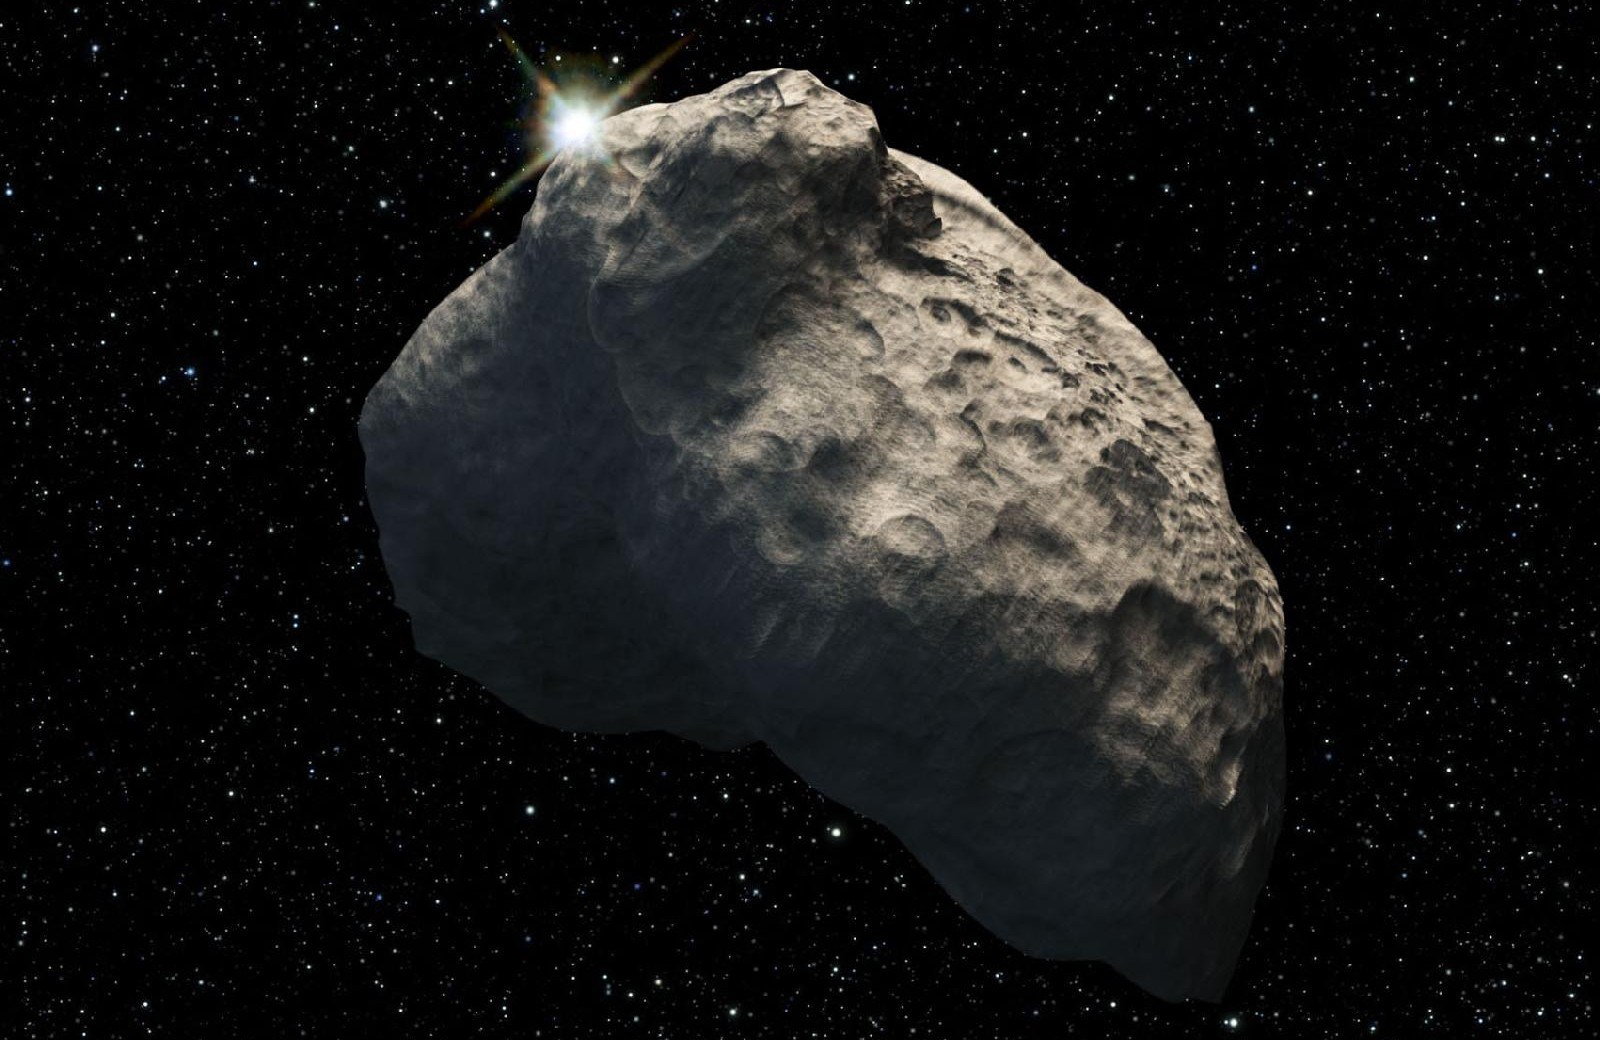 Astronomers Discover Kilometer-Sized Object in Kuiper Belt, Astronomy